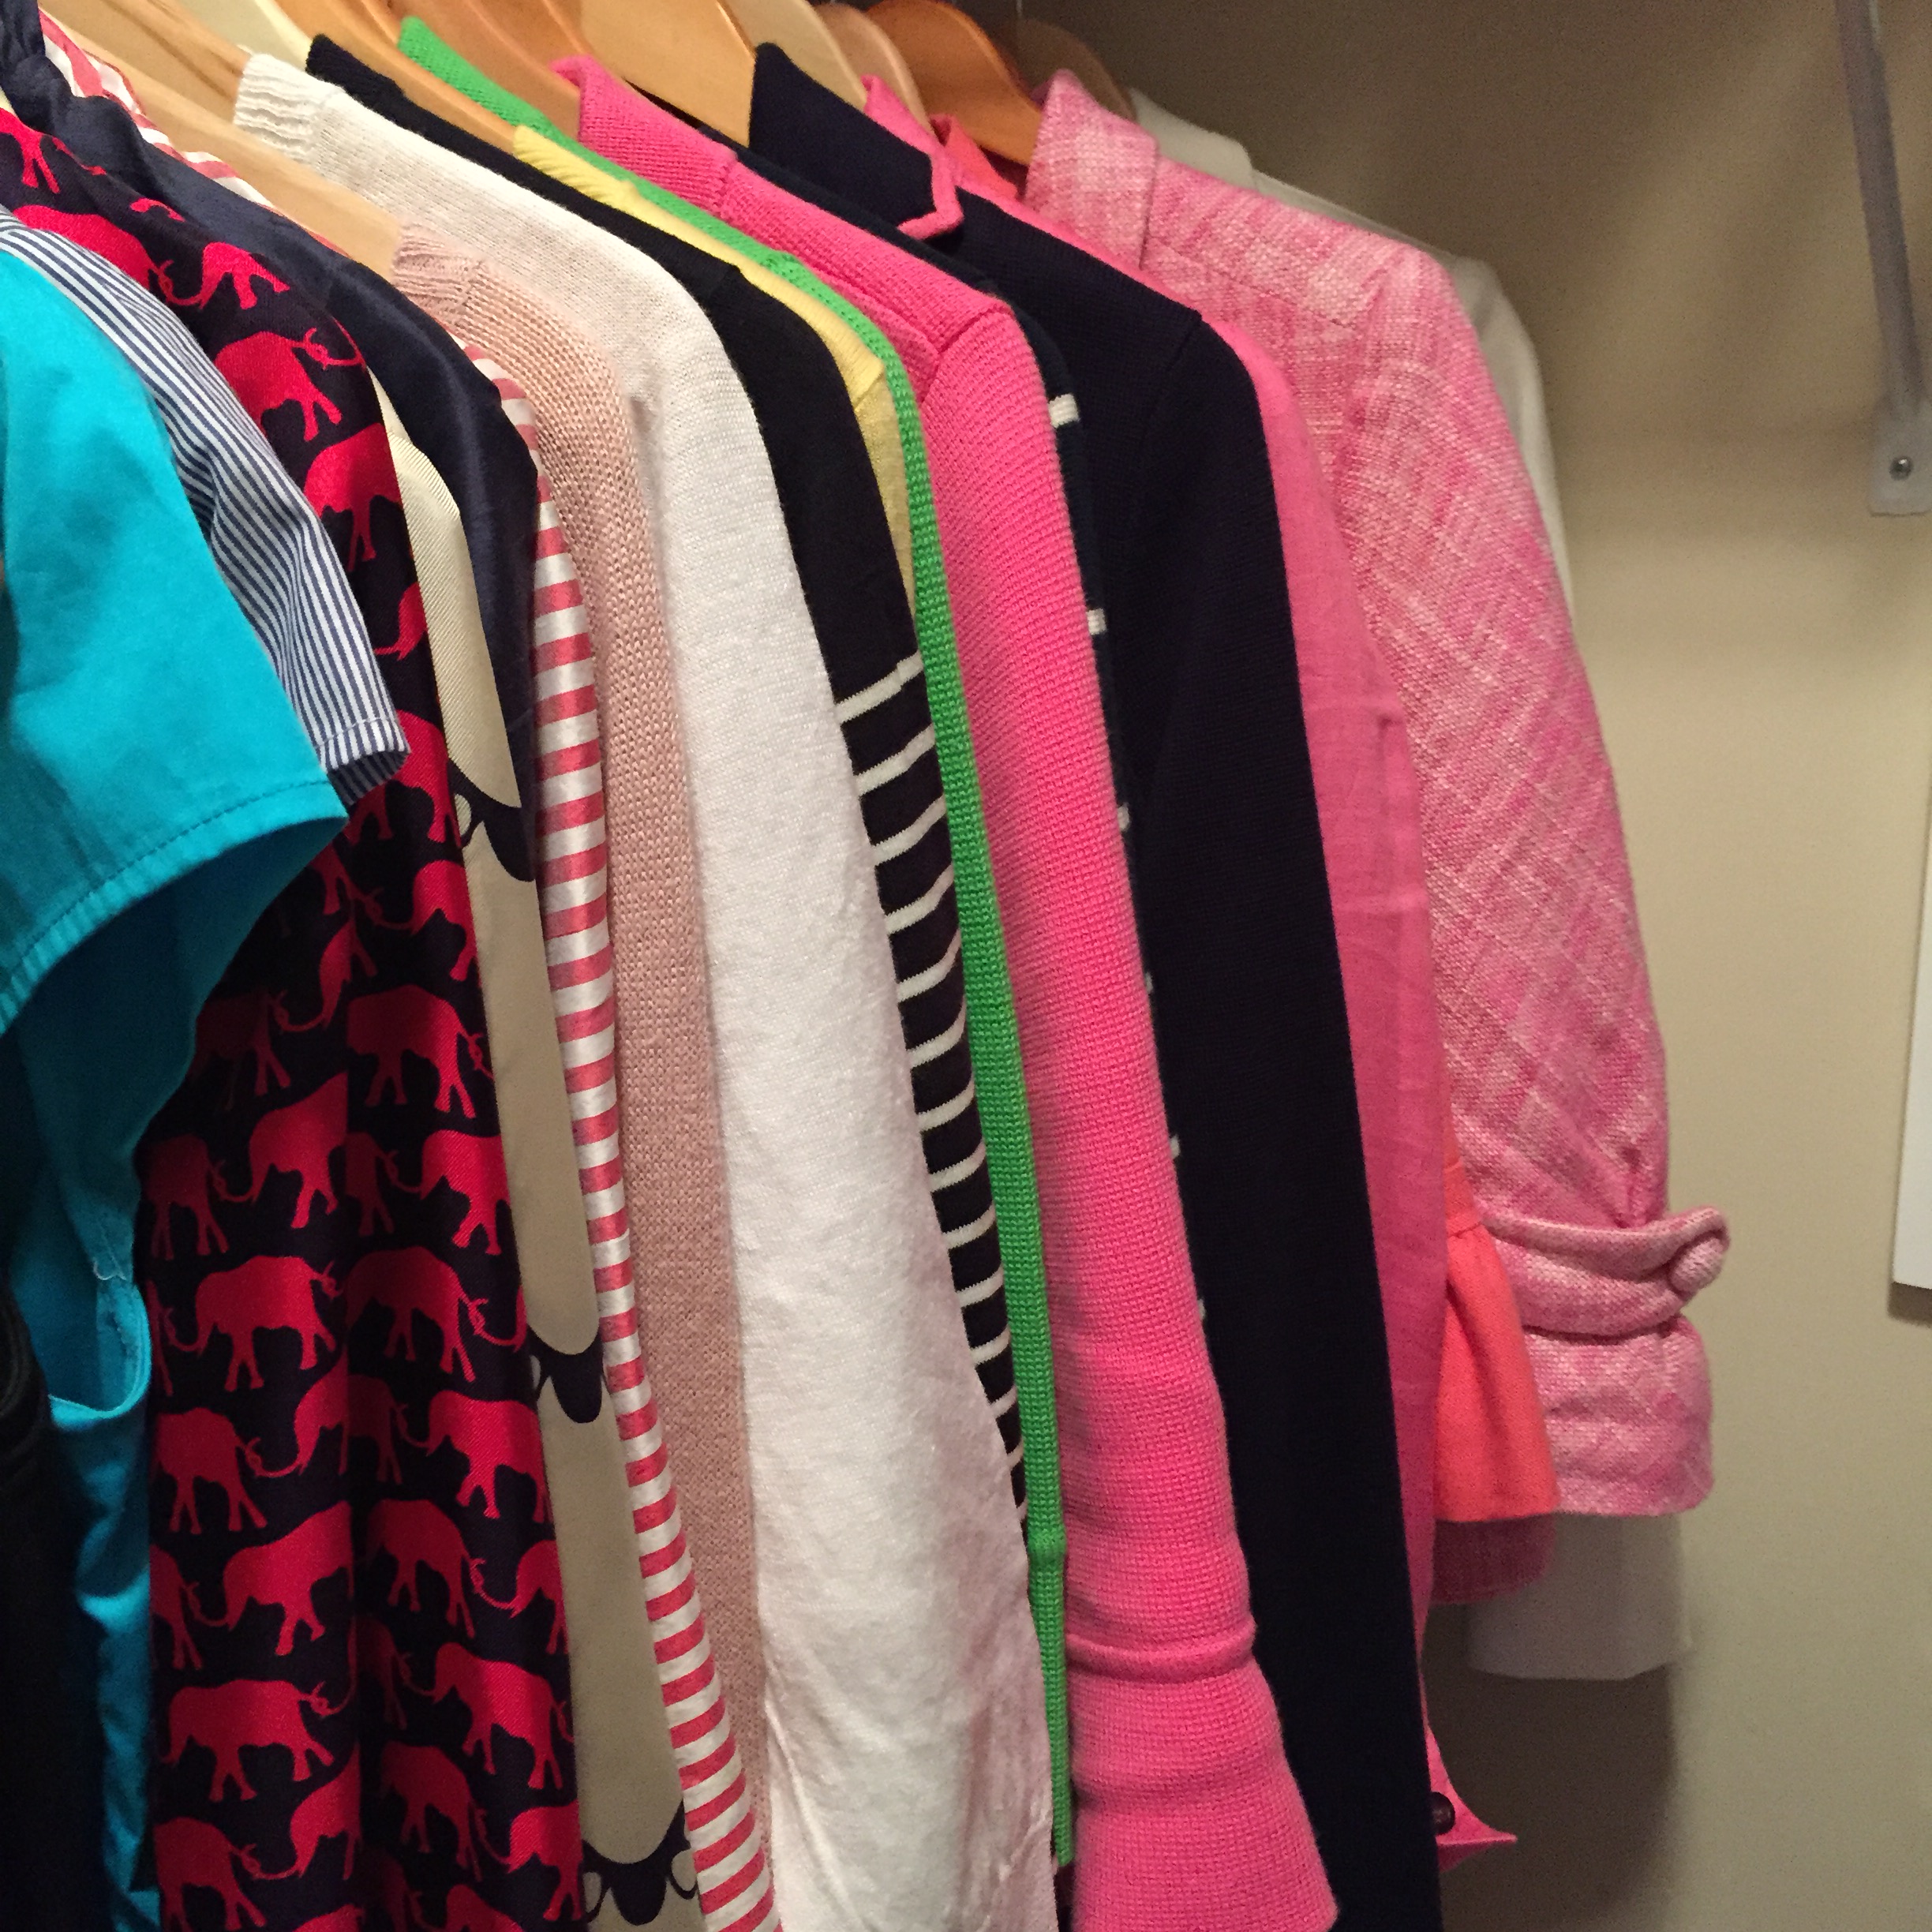 5 Simple Things You Can Do To Turn Your Closet Into Your Own Boutique.